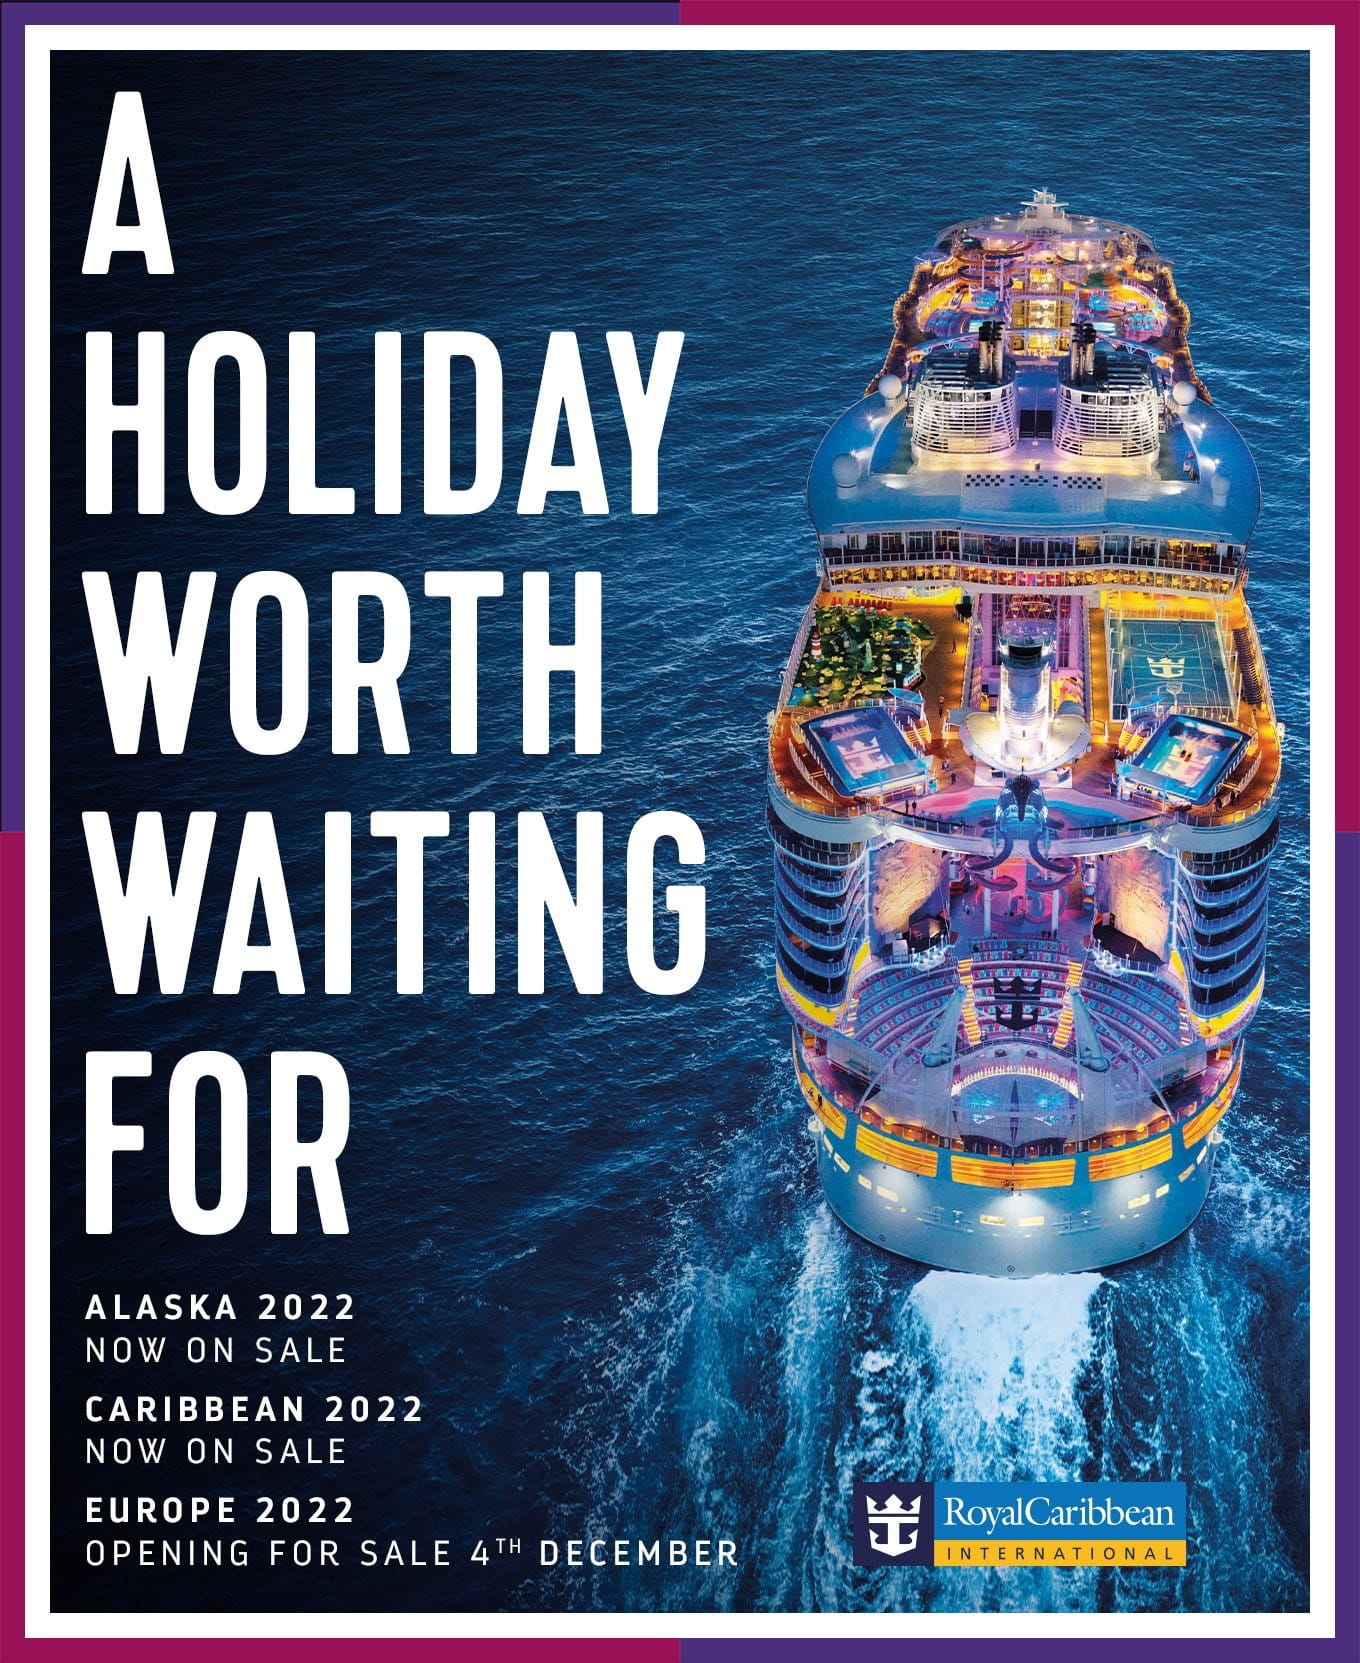 Royal Caribbean Cruise Holiday Deals 2022 - Cruise Nation - Thanksgiving 2022 Cruise Deals